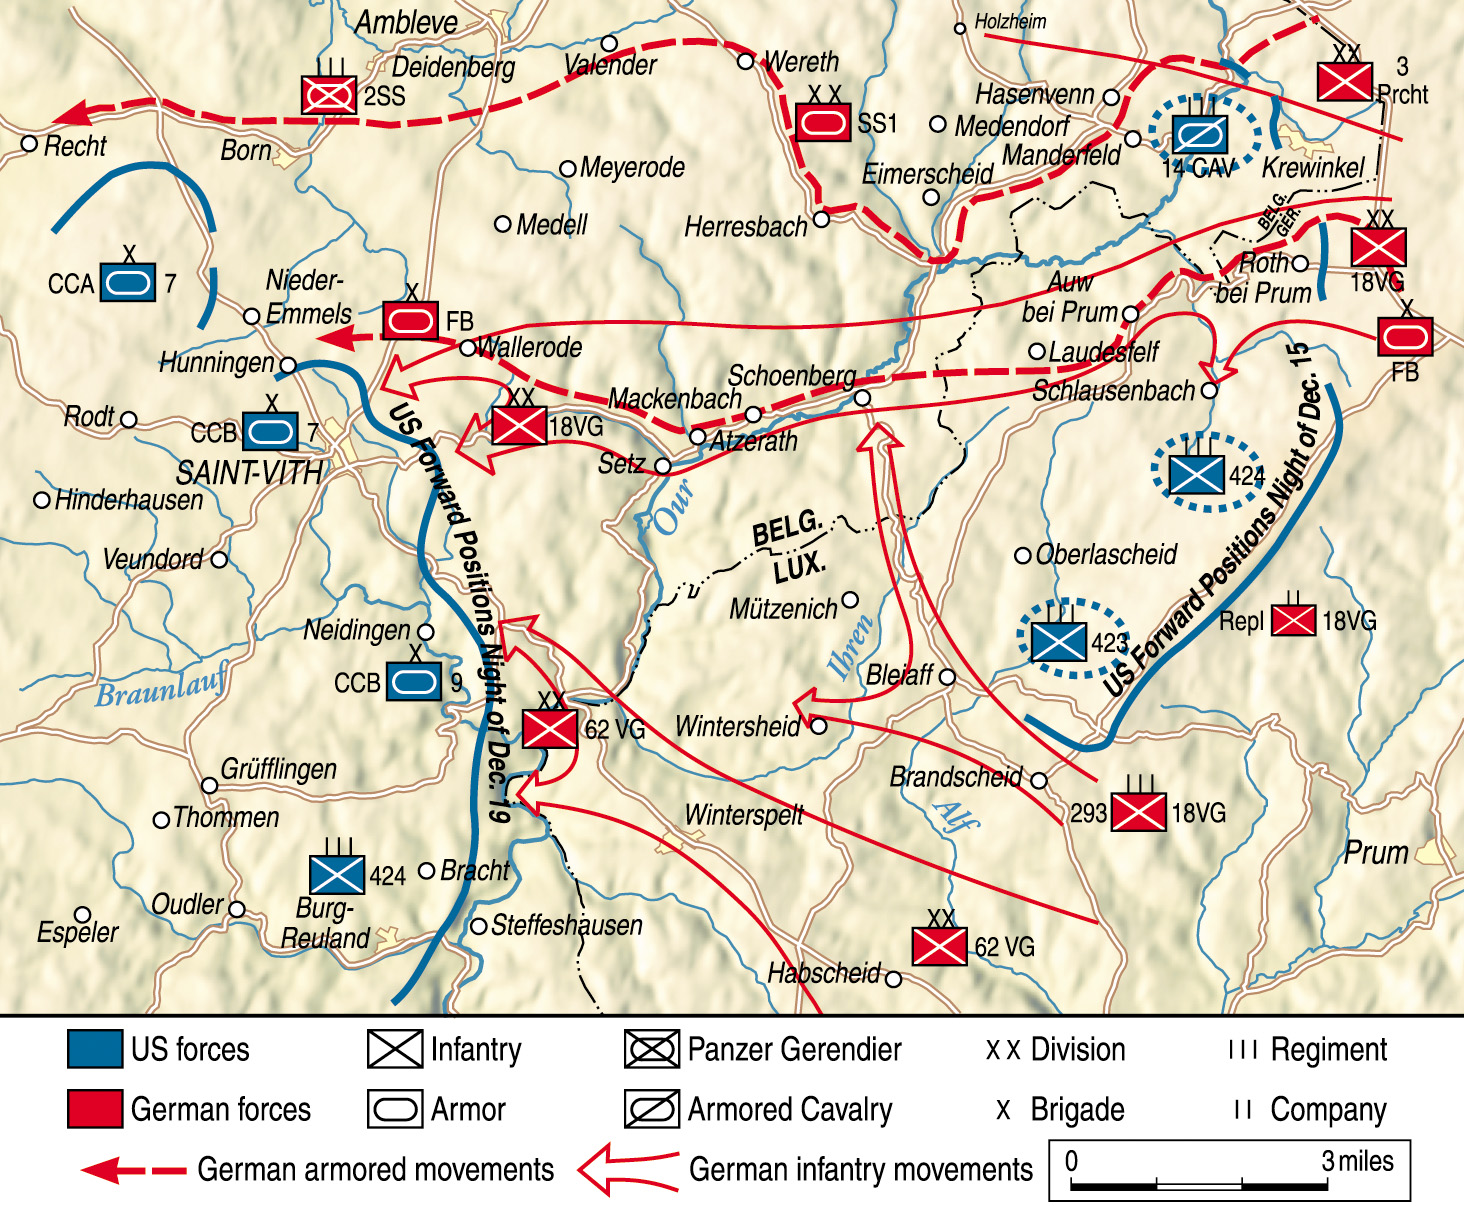 The initial rapid successes of the German drive through the Ardennes in 1944 could not be exploited quickly enough. Eventually, Allied resistance stiffened, dooming the offensive to little more than a setback for the Allies. 